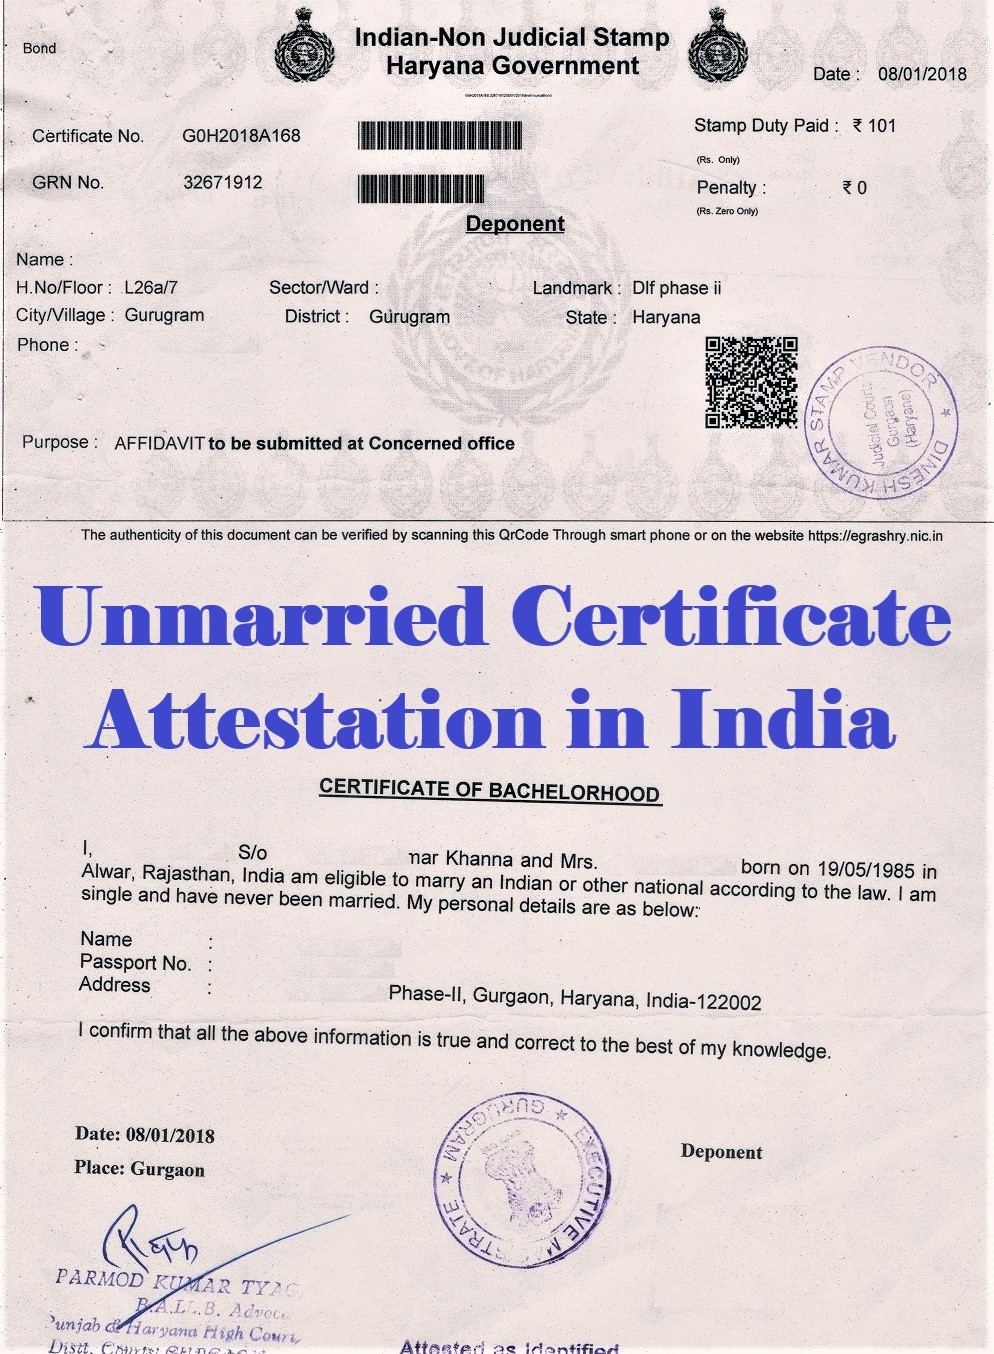 Unmarried Certificate Attestation from Mongolia Embassy